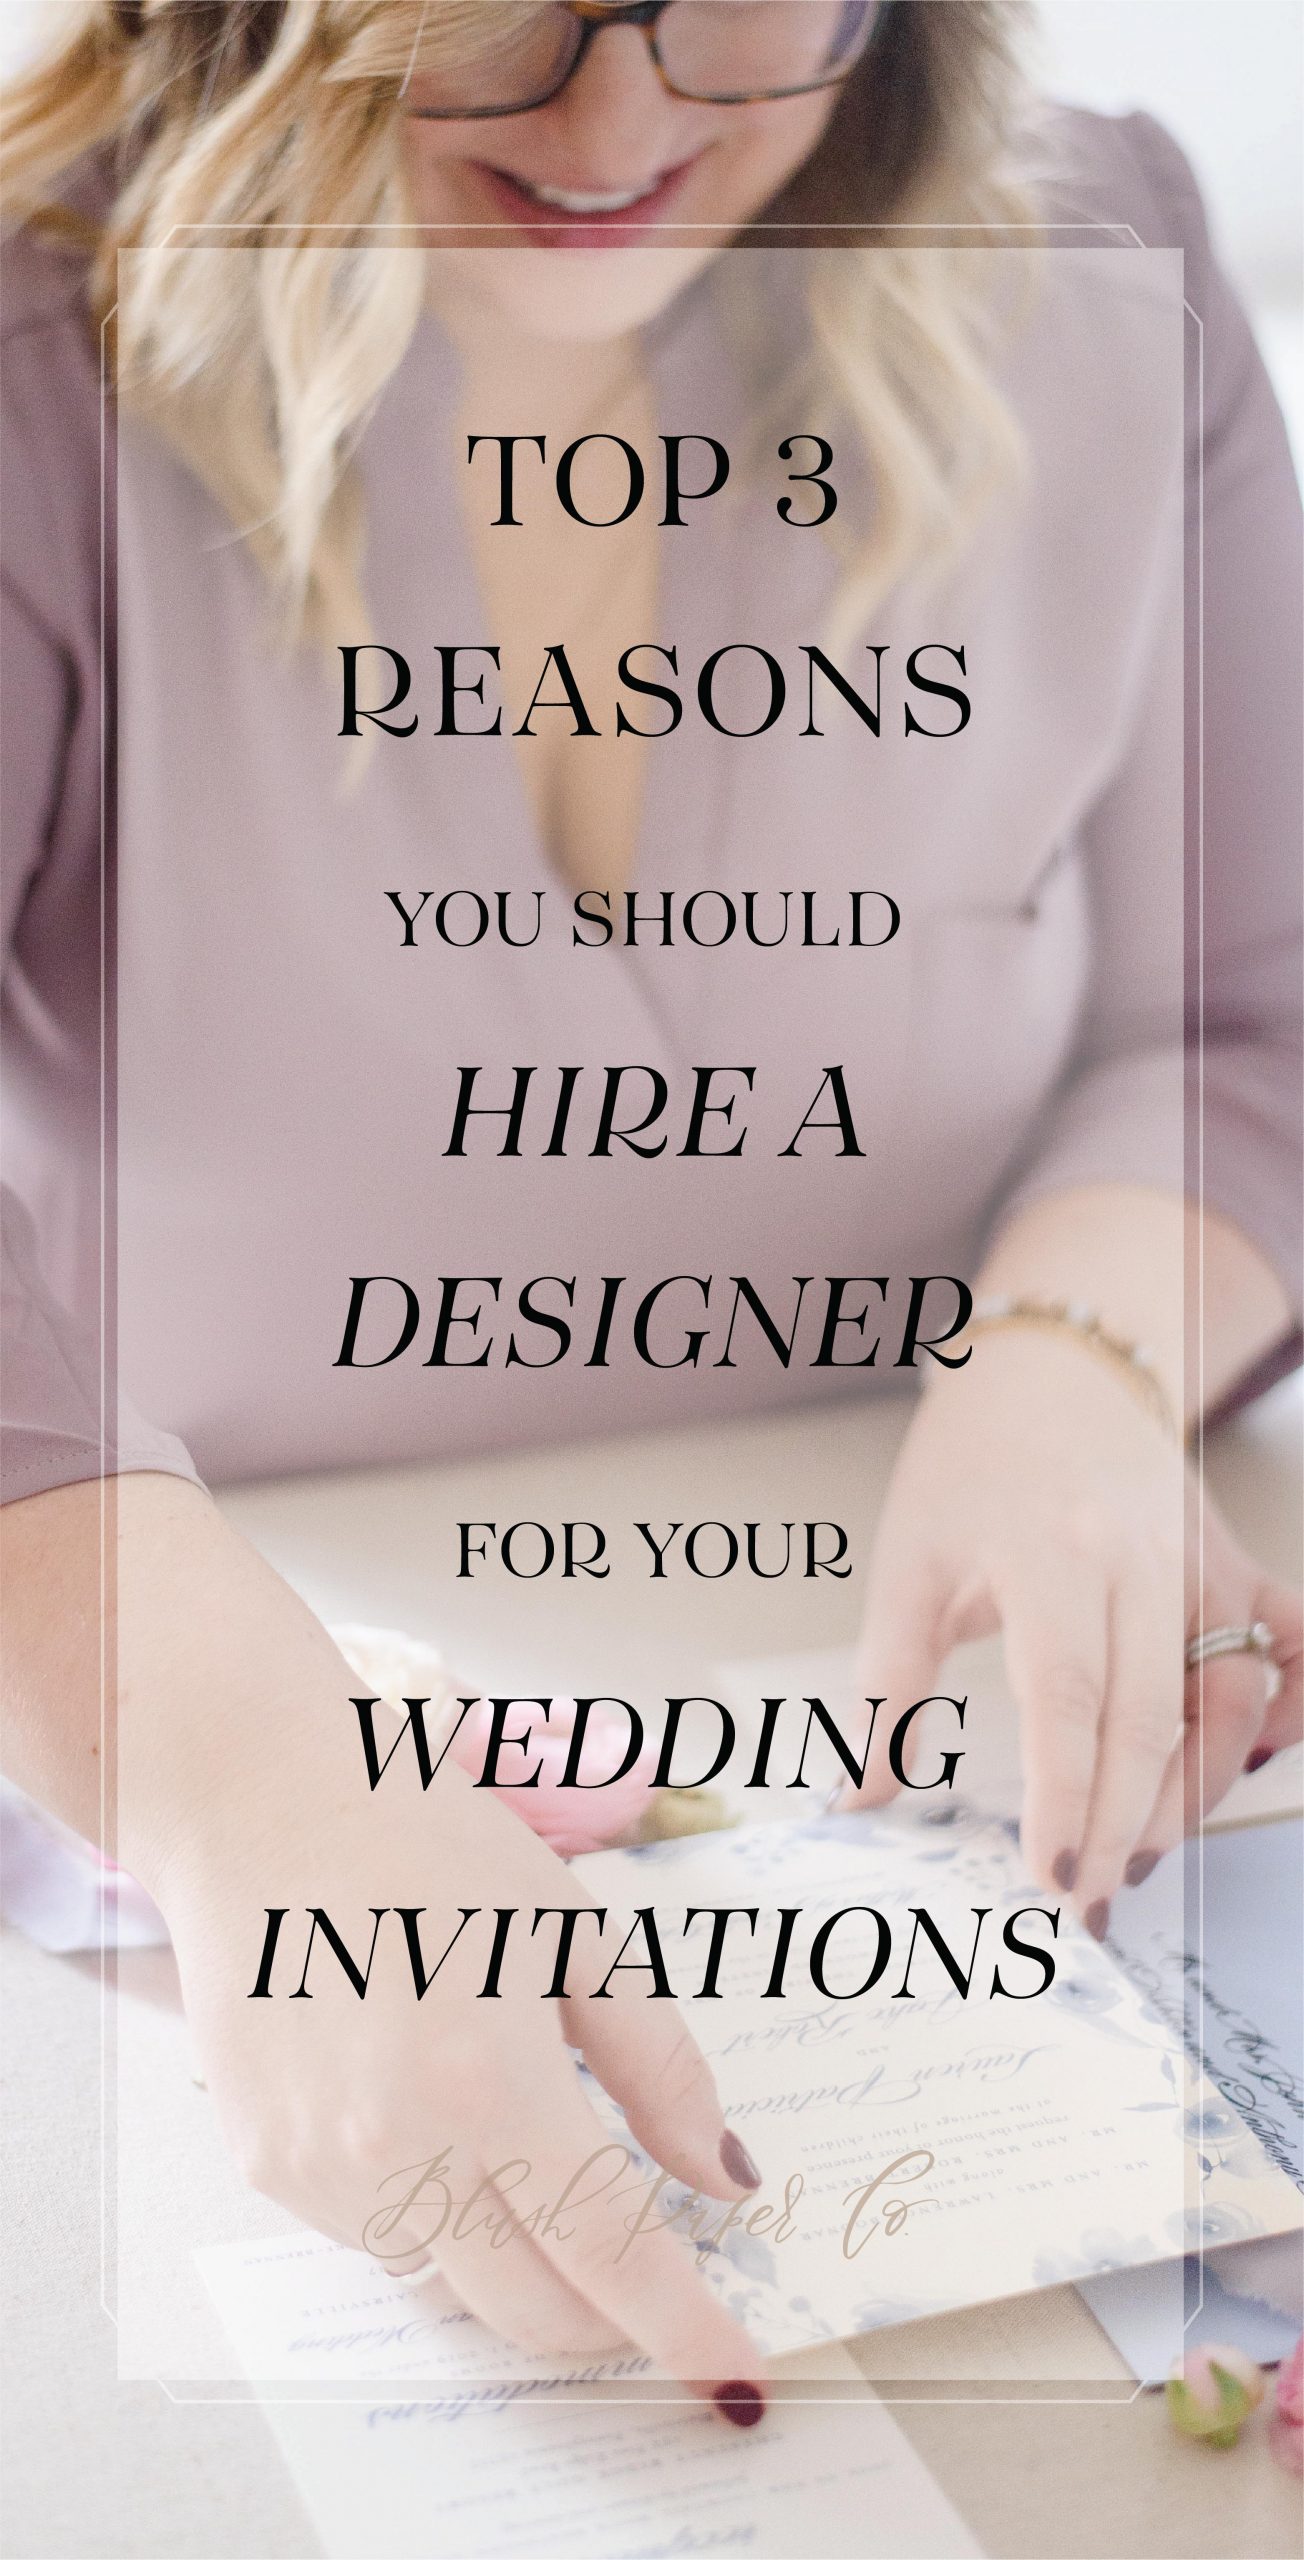 Top 3 Reasons You Should Hire a Designer For Your Wedding Invitations